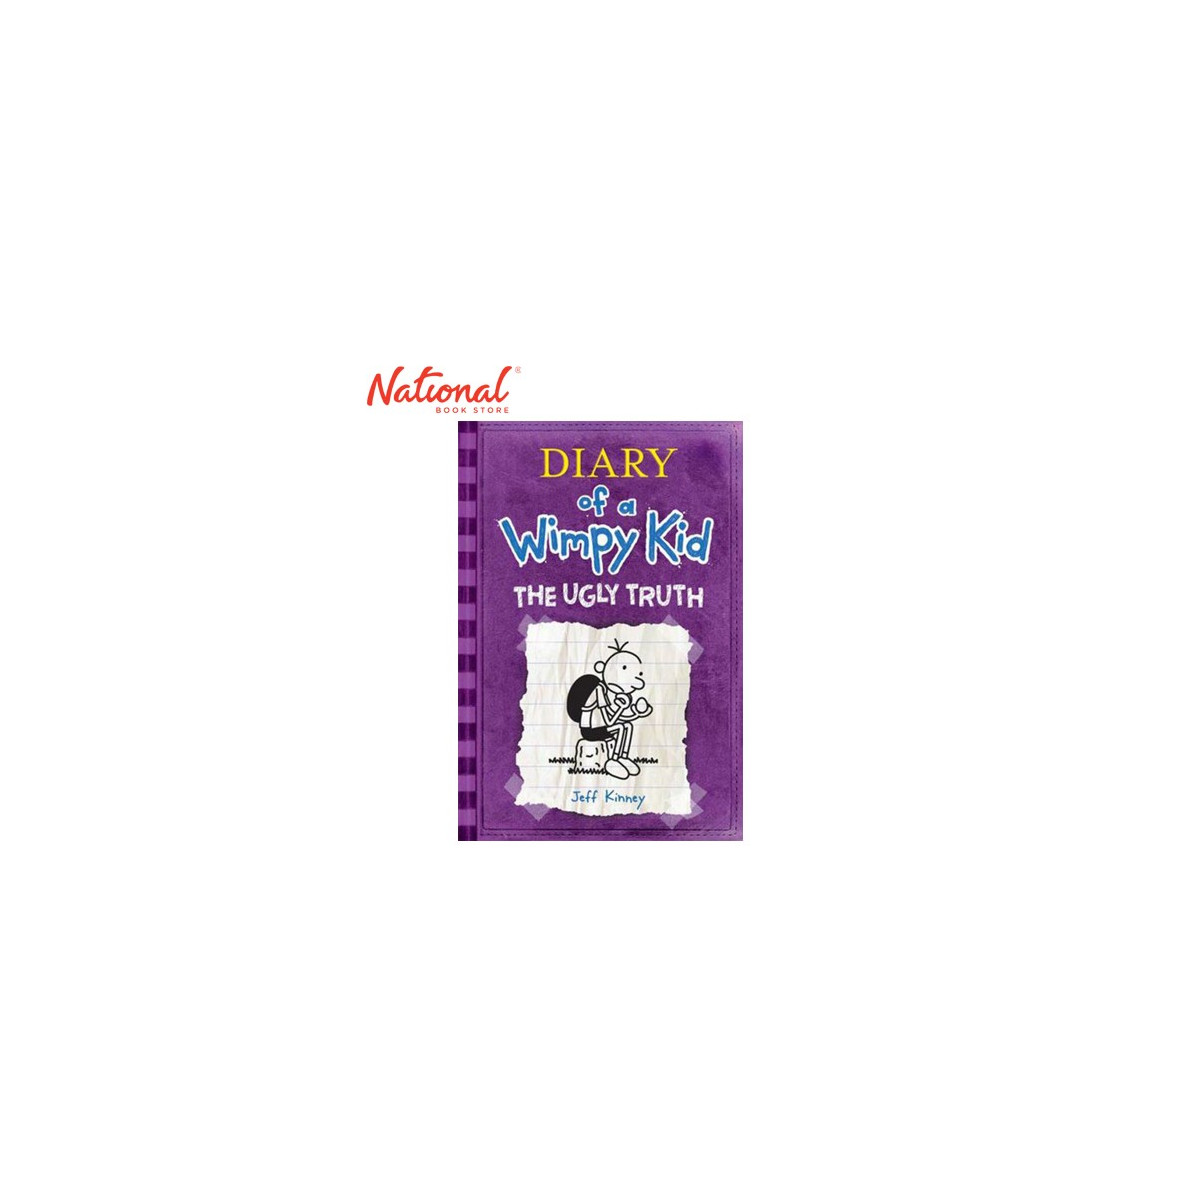 DIARY OF A WIMPY KID5 UGLY TRUTH